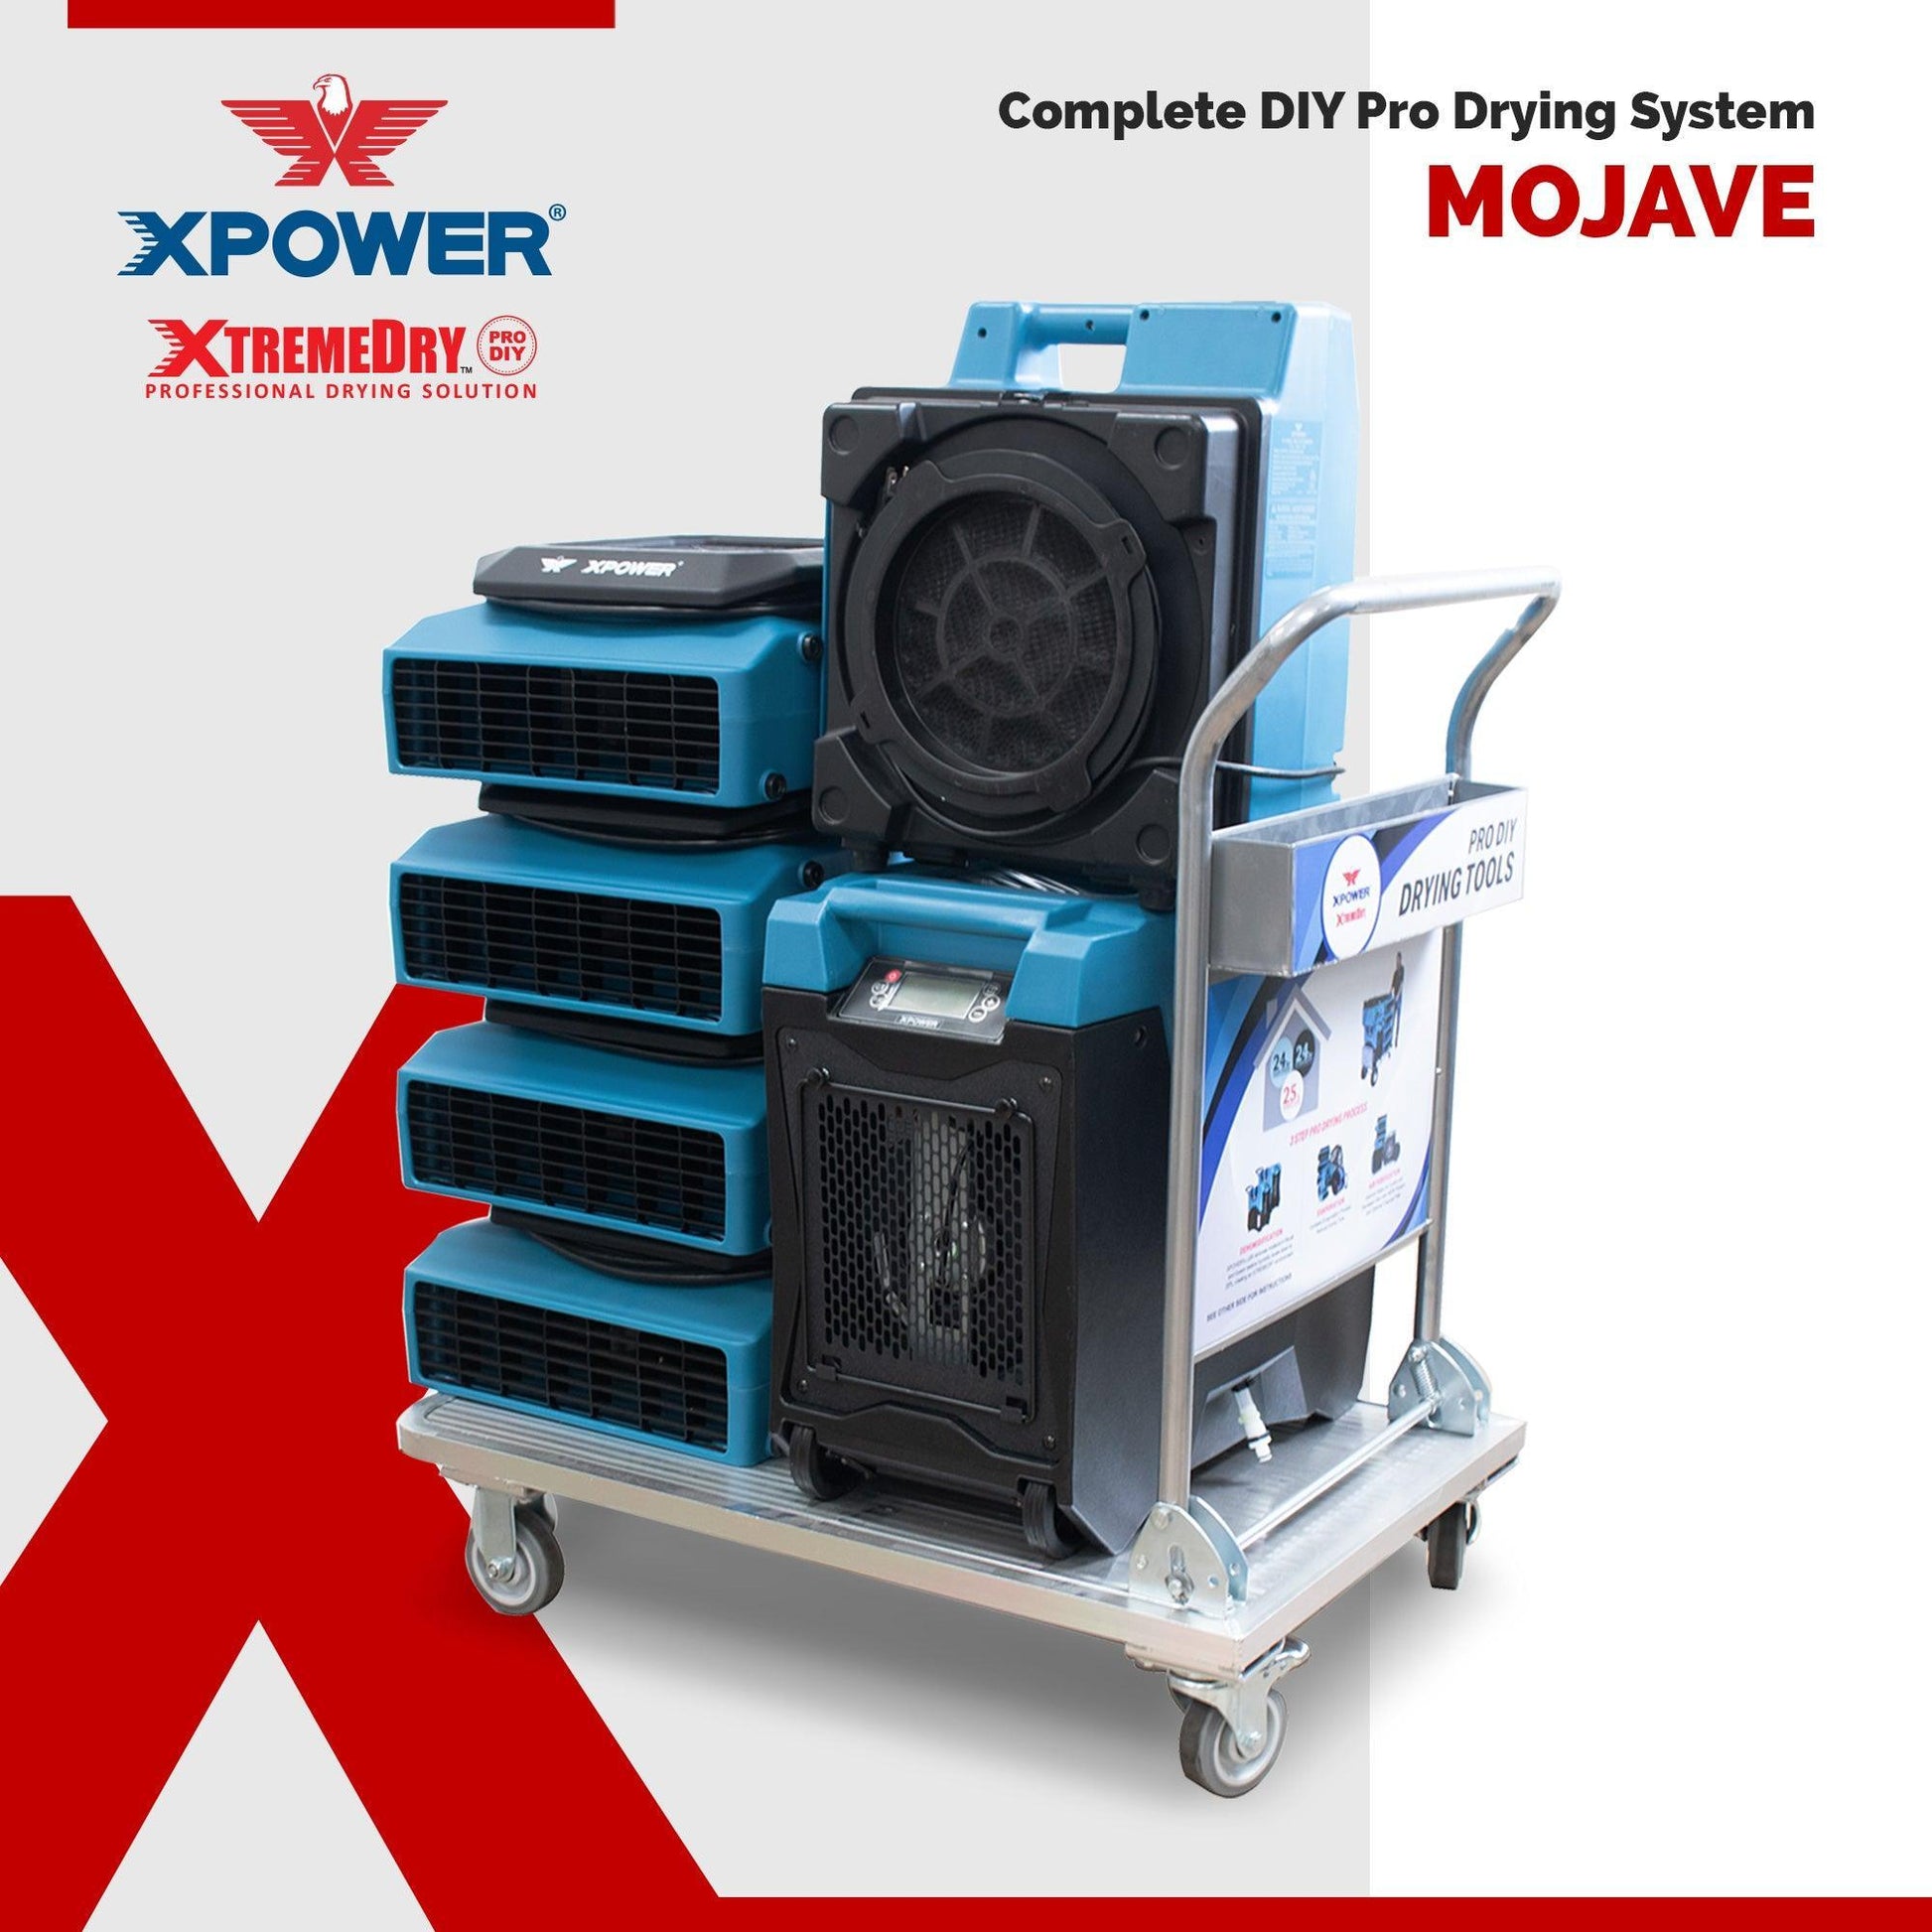 XPOWER XTREMEDRY® Mojave Complete Commercial DIY Pro-Drying System - Elite Air Purifiers